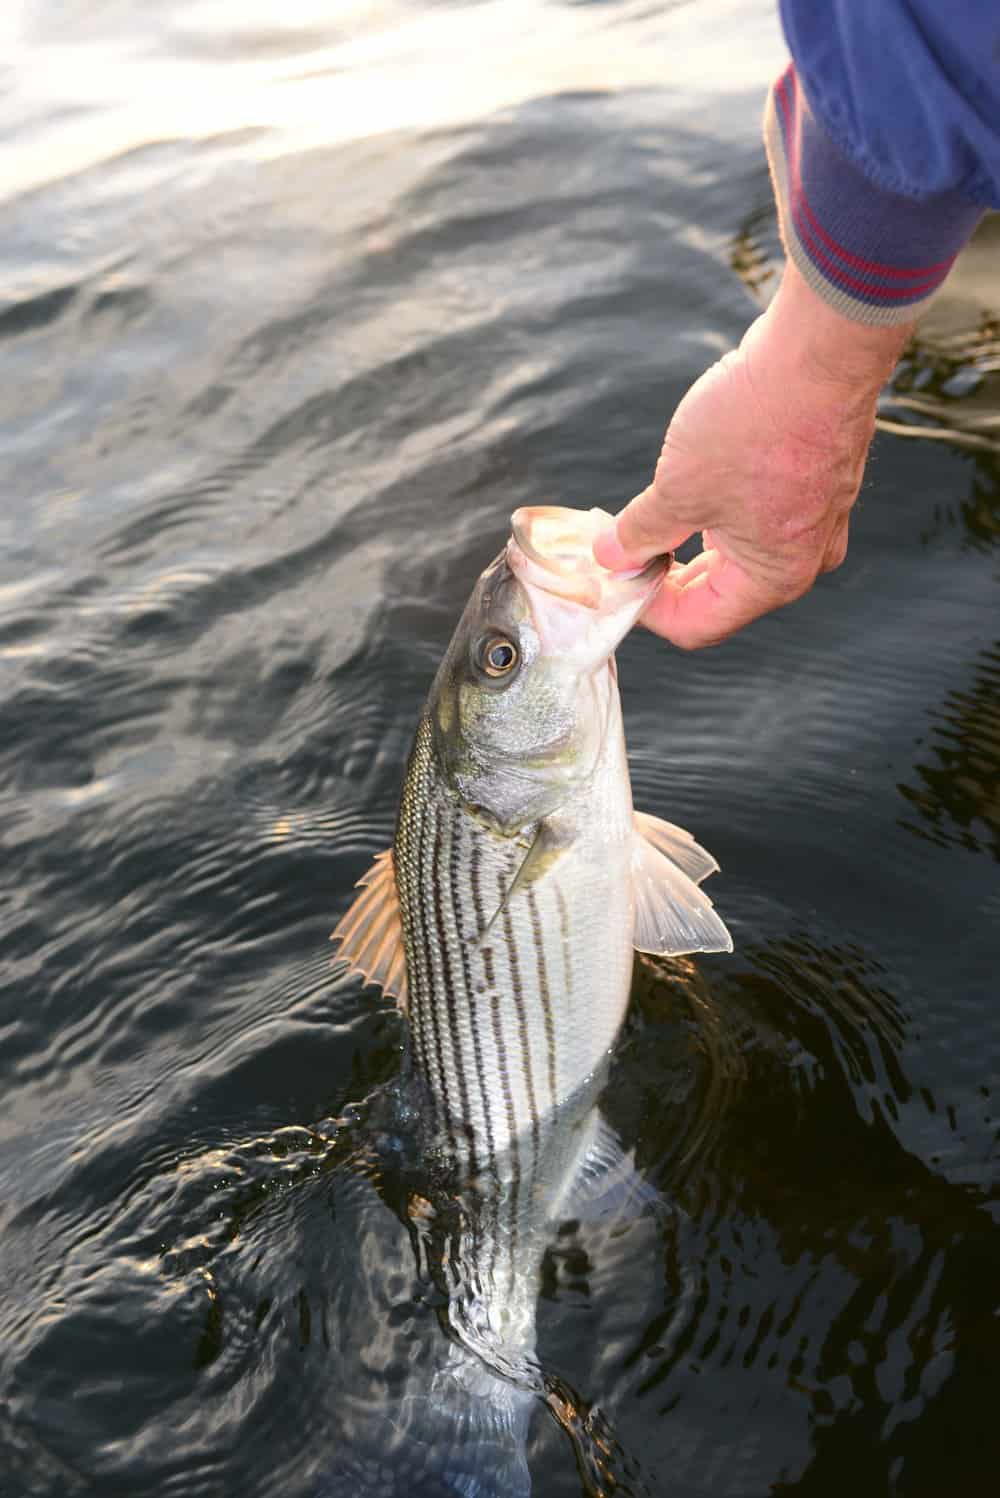   The stress of fighting a rod and line in oxygen-depleted water leaves fish vulnerable to dying after release, unless handled gently.  